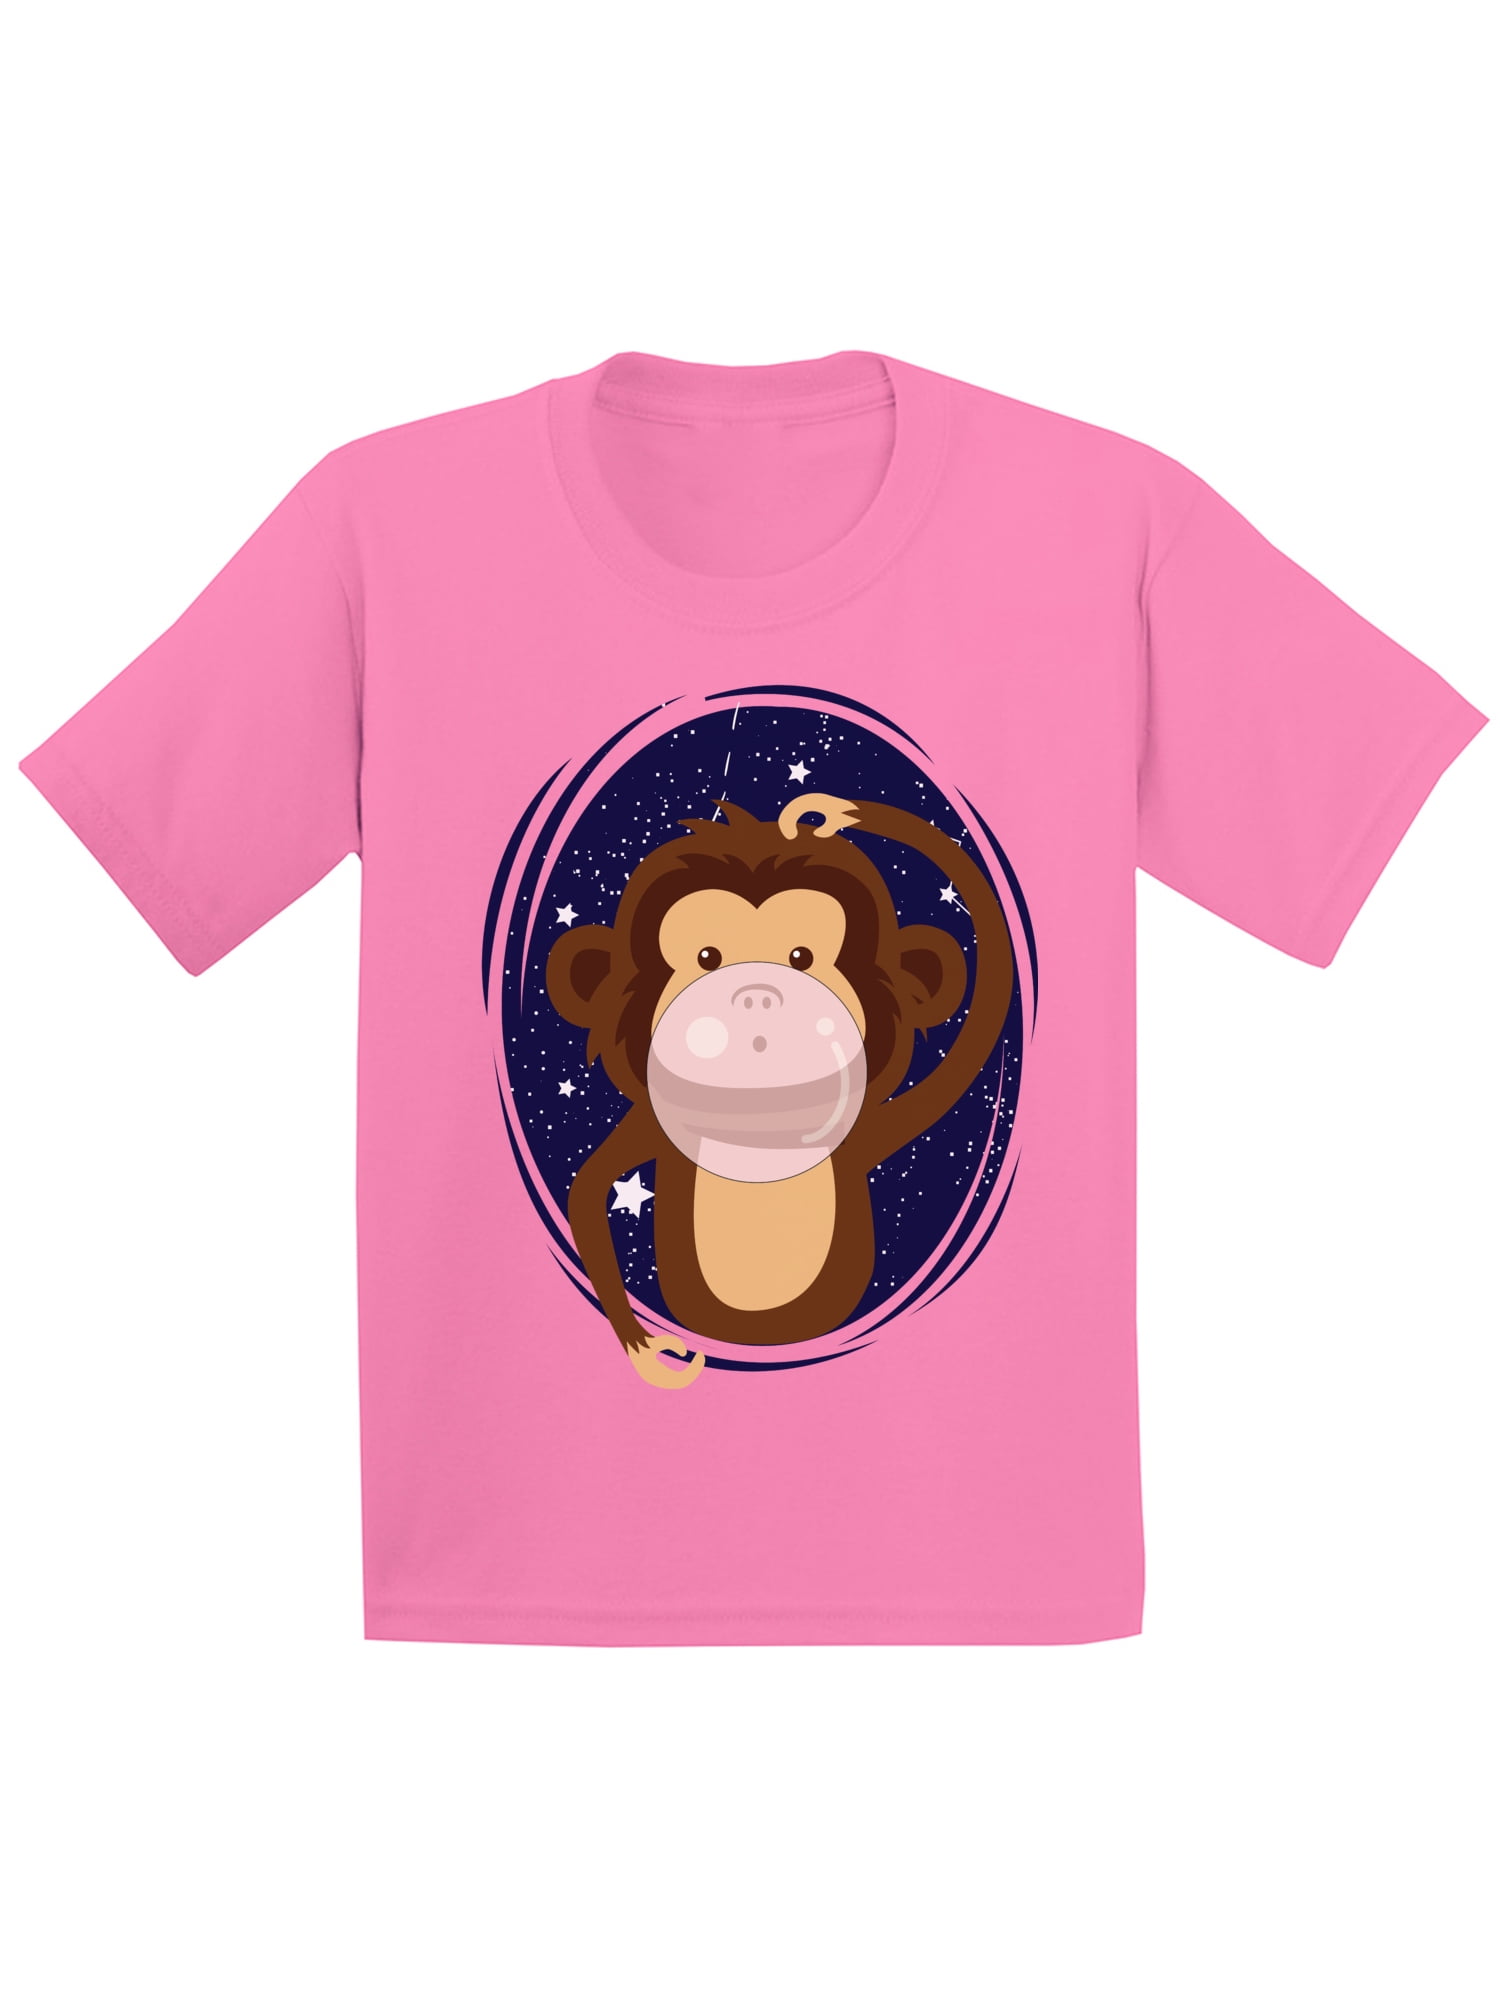 Toddler Winged Monkey T-shirt Funny Toddler Tee Gift Boys Monkey Wings shirt Girls Monkey Tee Back to School shirt Flying Monkey tee